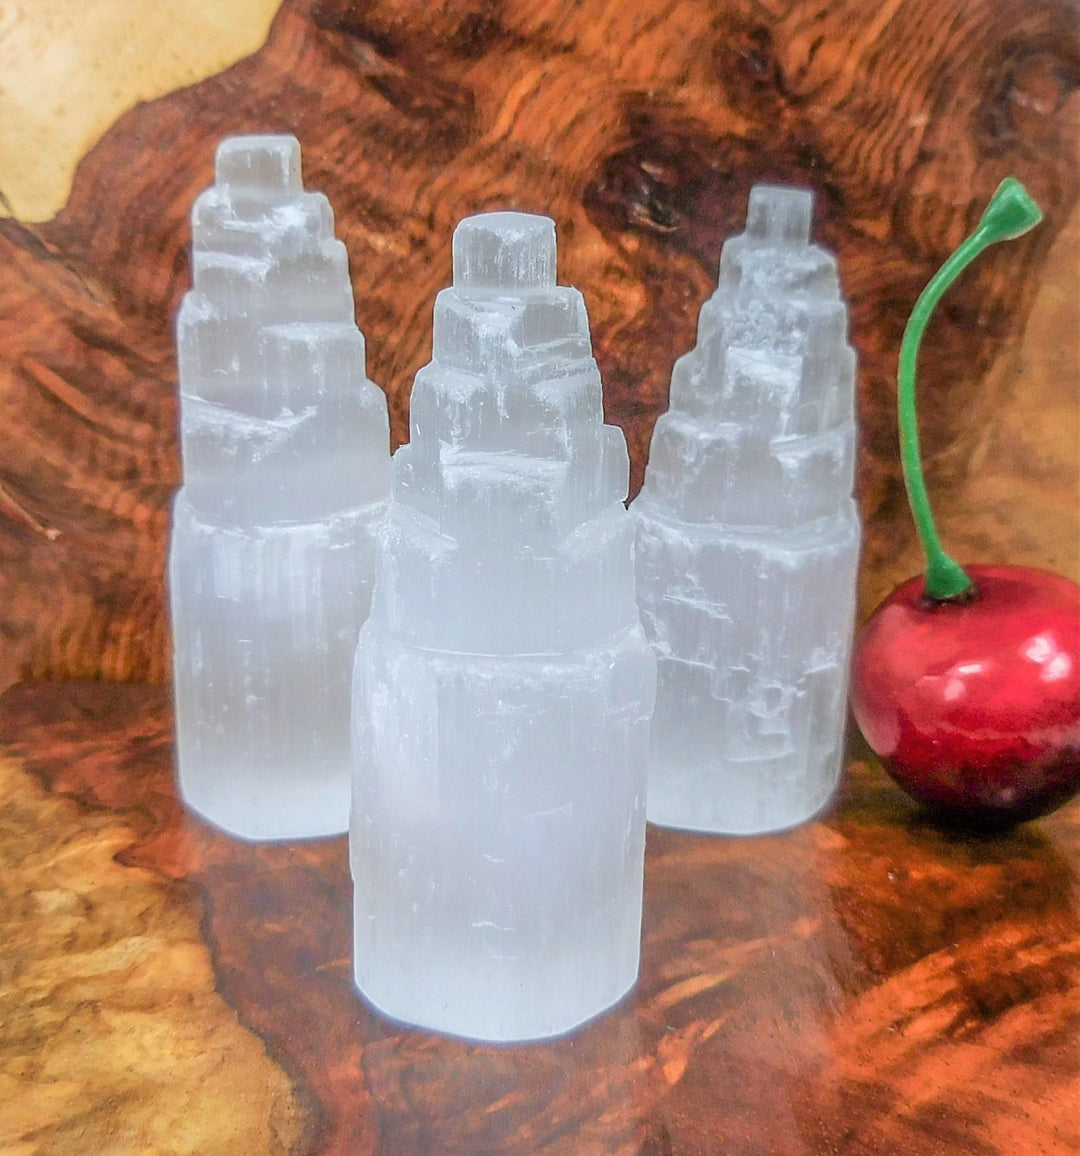 Petite Small Selenite Crystal Towers ( 3 Pcs ) Free Standing Point Raw Gemstone Display Piece Rough Natural Stone Towers Healing Crystals Stones